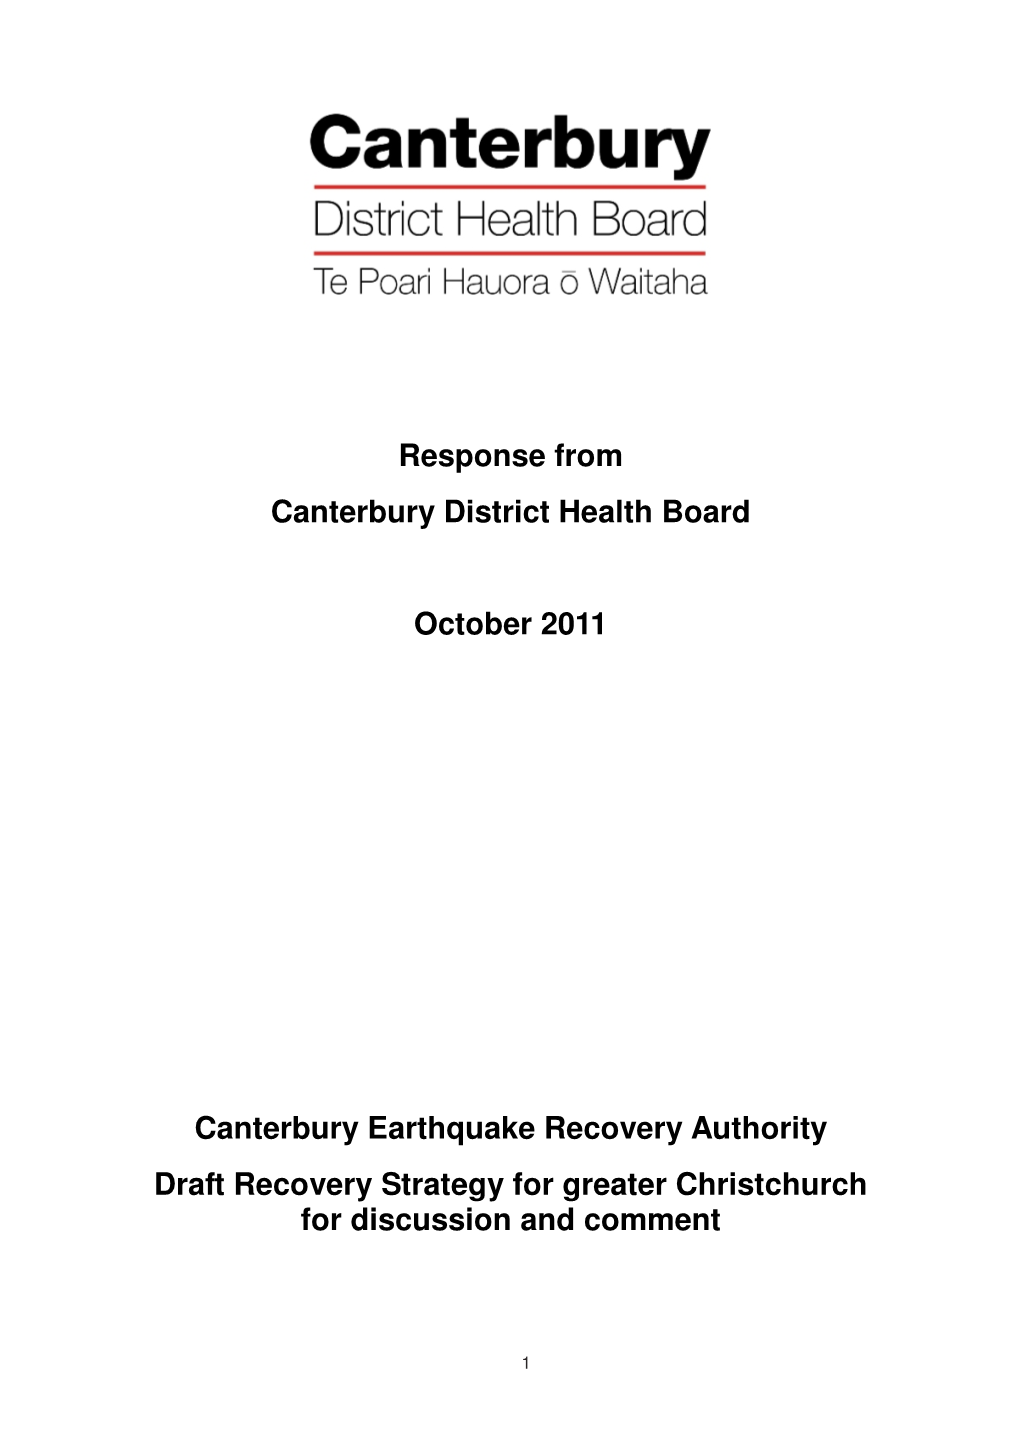 Response from Canterbury District Health Board October 2011